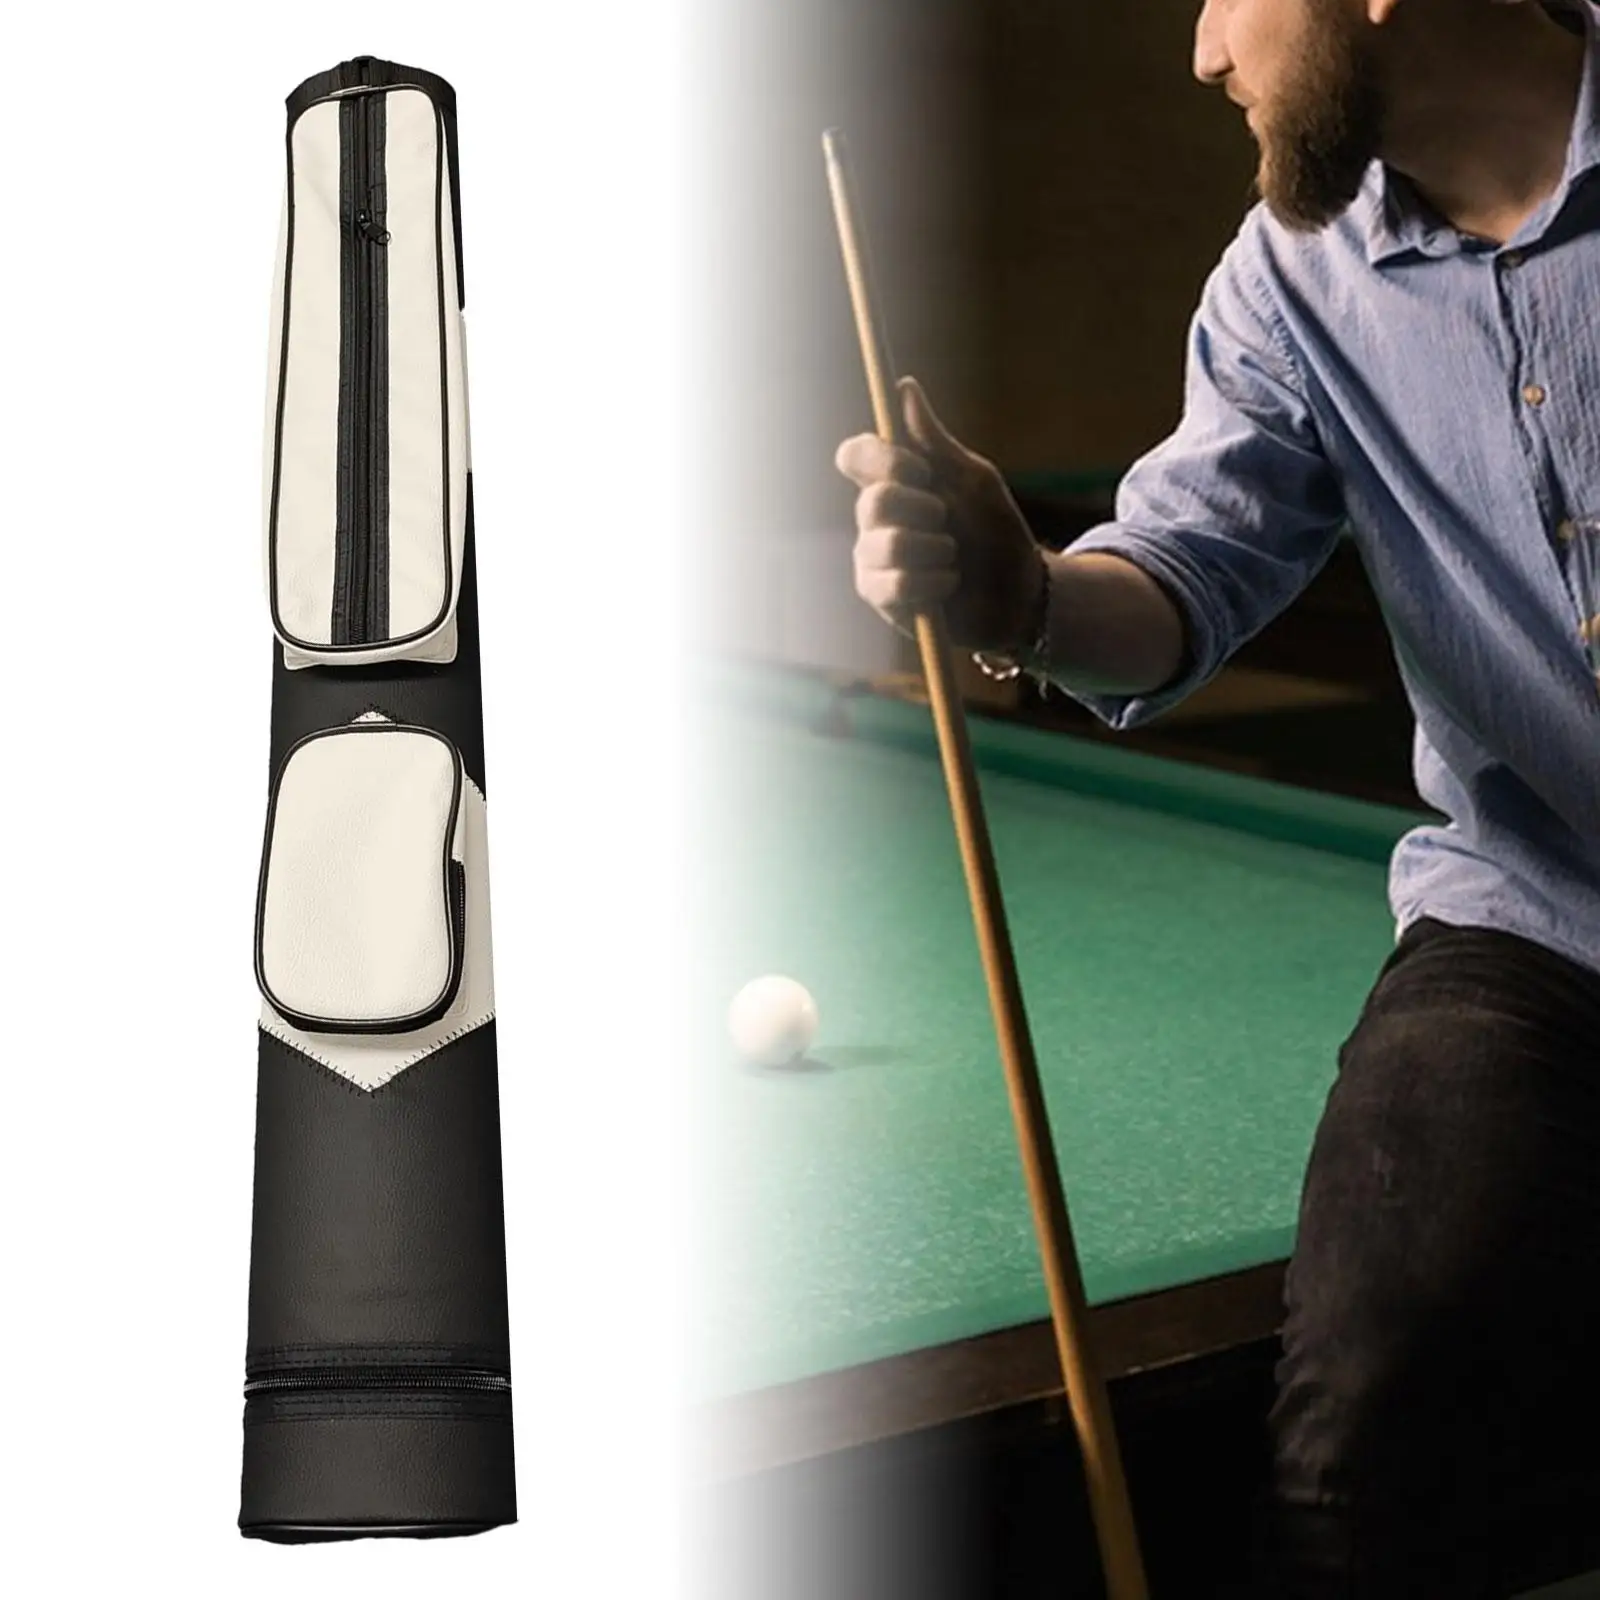 Billiards Pool with Side Pocket, Durable Pool Cue Storage Pouch, Billiard